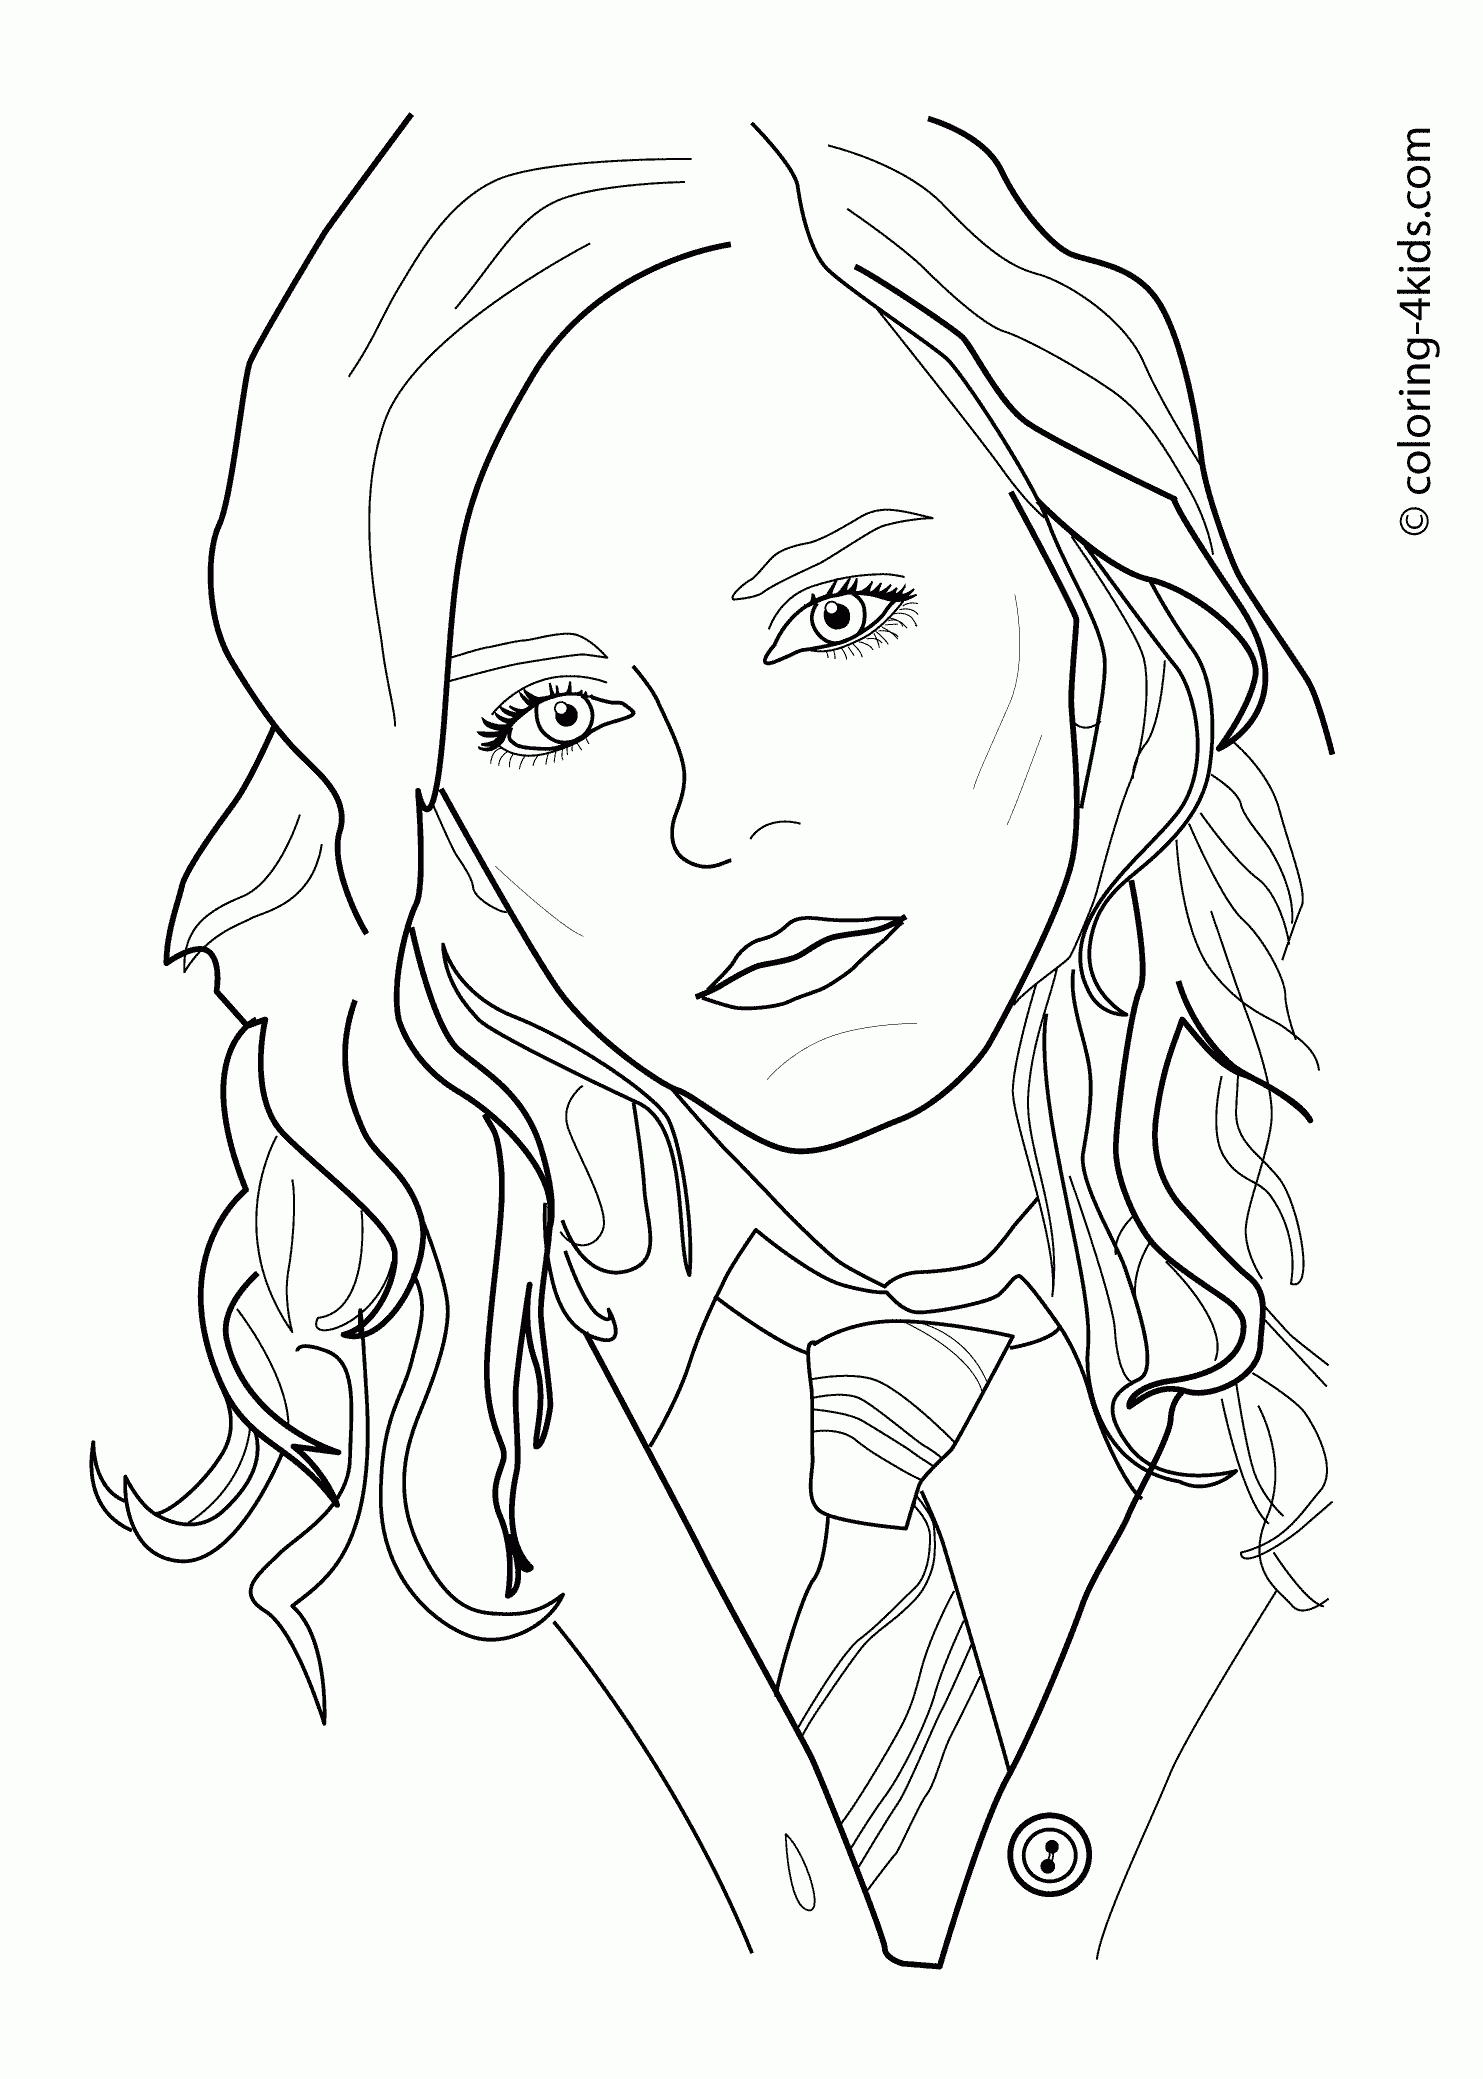 Emma Watson Coloring Pages For Kids, Printable Free Coloring Books avec Hermione Granger Coloriage Hermione